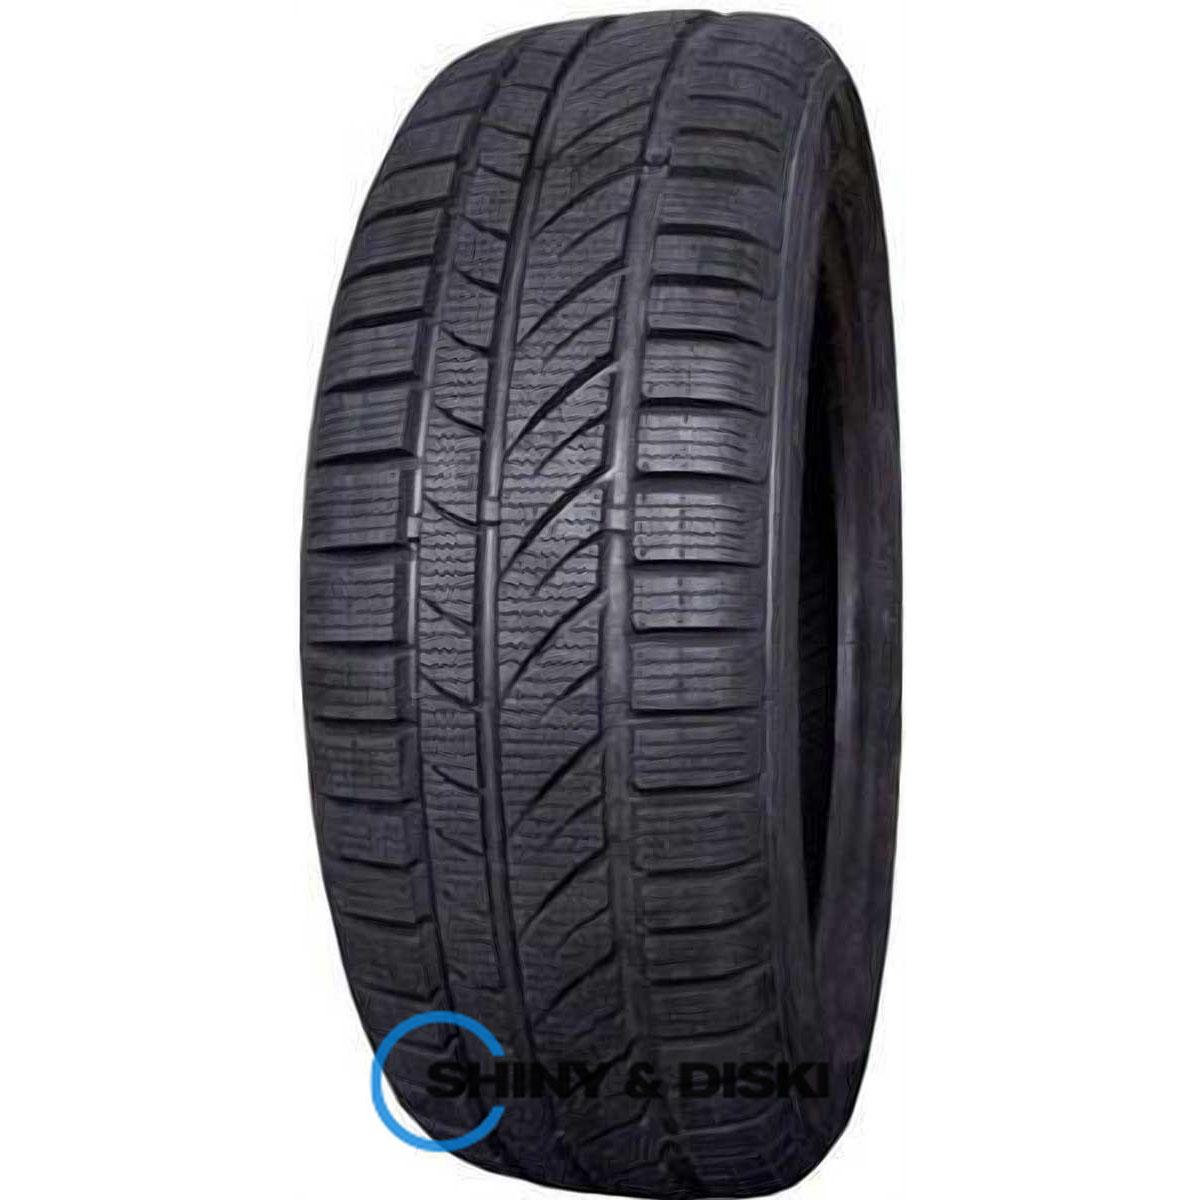 infinity inf-049 175/70 r13 82t